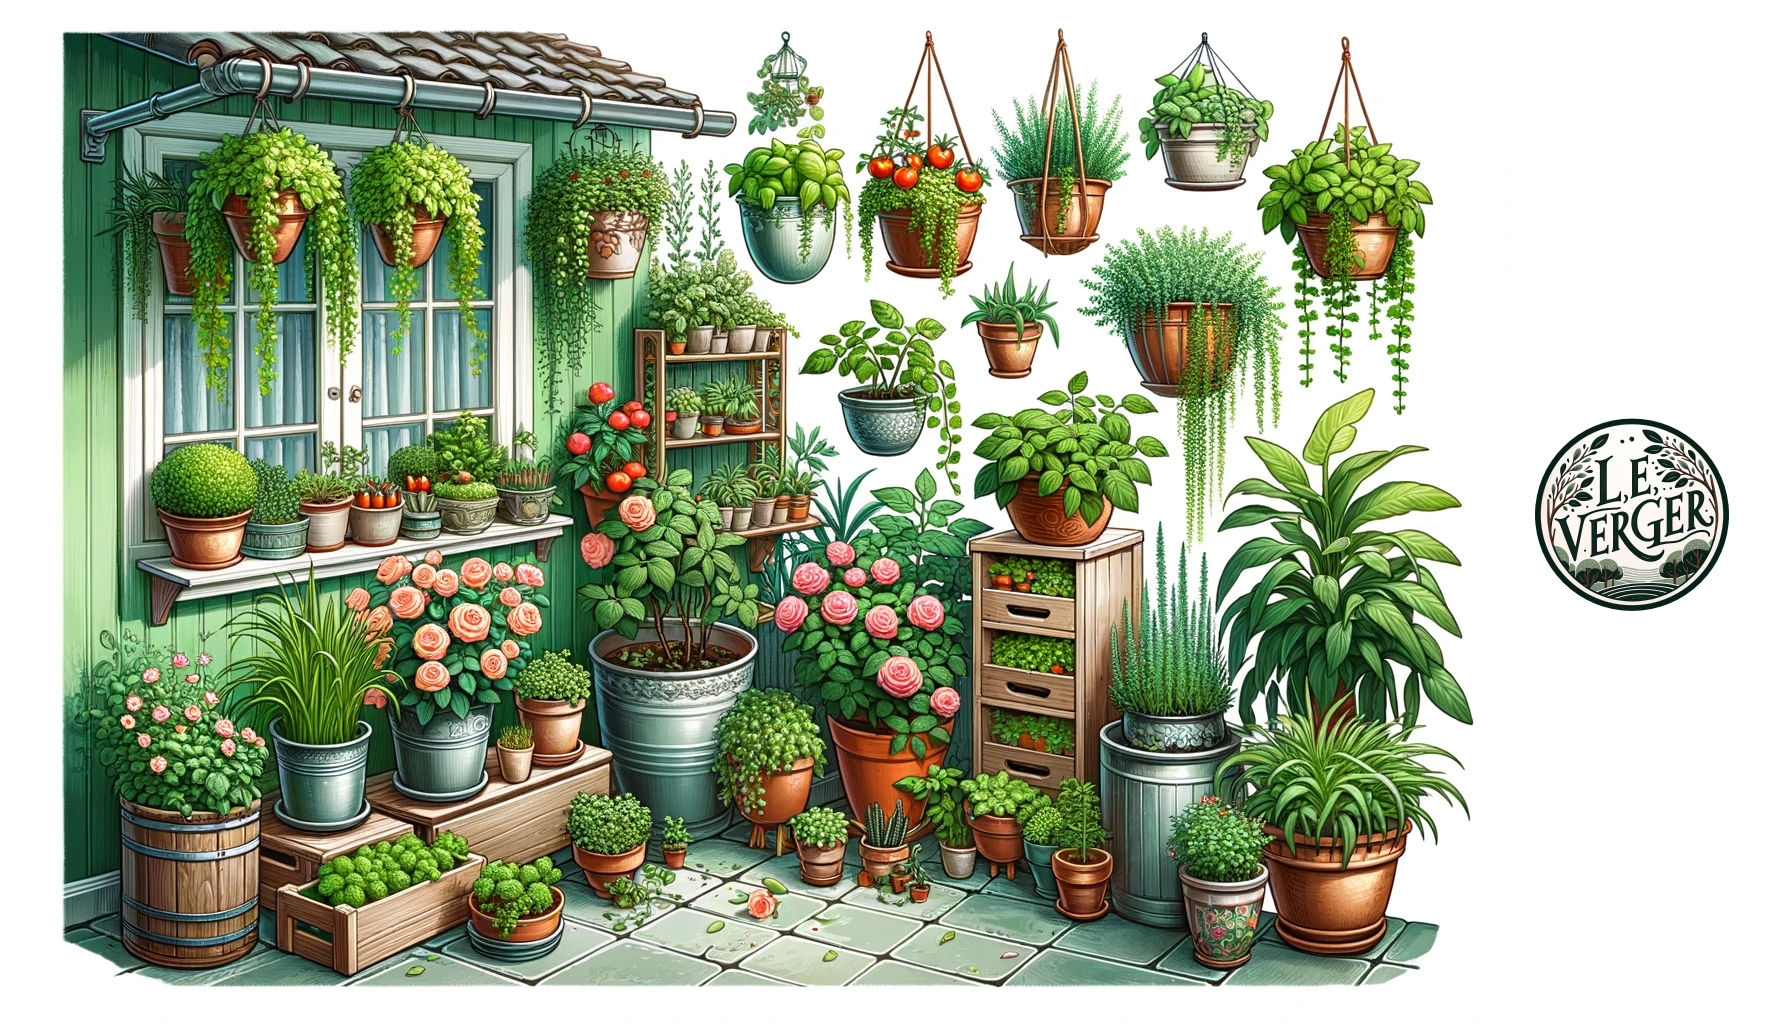 Illustration of a small patio transformed into a haven of greenery through container gardening. There are ceramic pots with roses, metallic containers with basil and mint, and wooden planters with tomatoes. A few hanging pots from the roof display trailing plants, adding layers to the green oasis. A windowsill in the background features smaller pots with succulents and cacti.